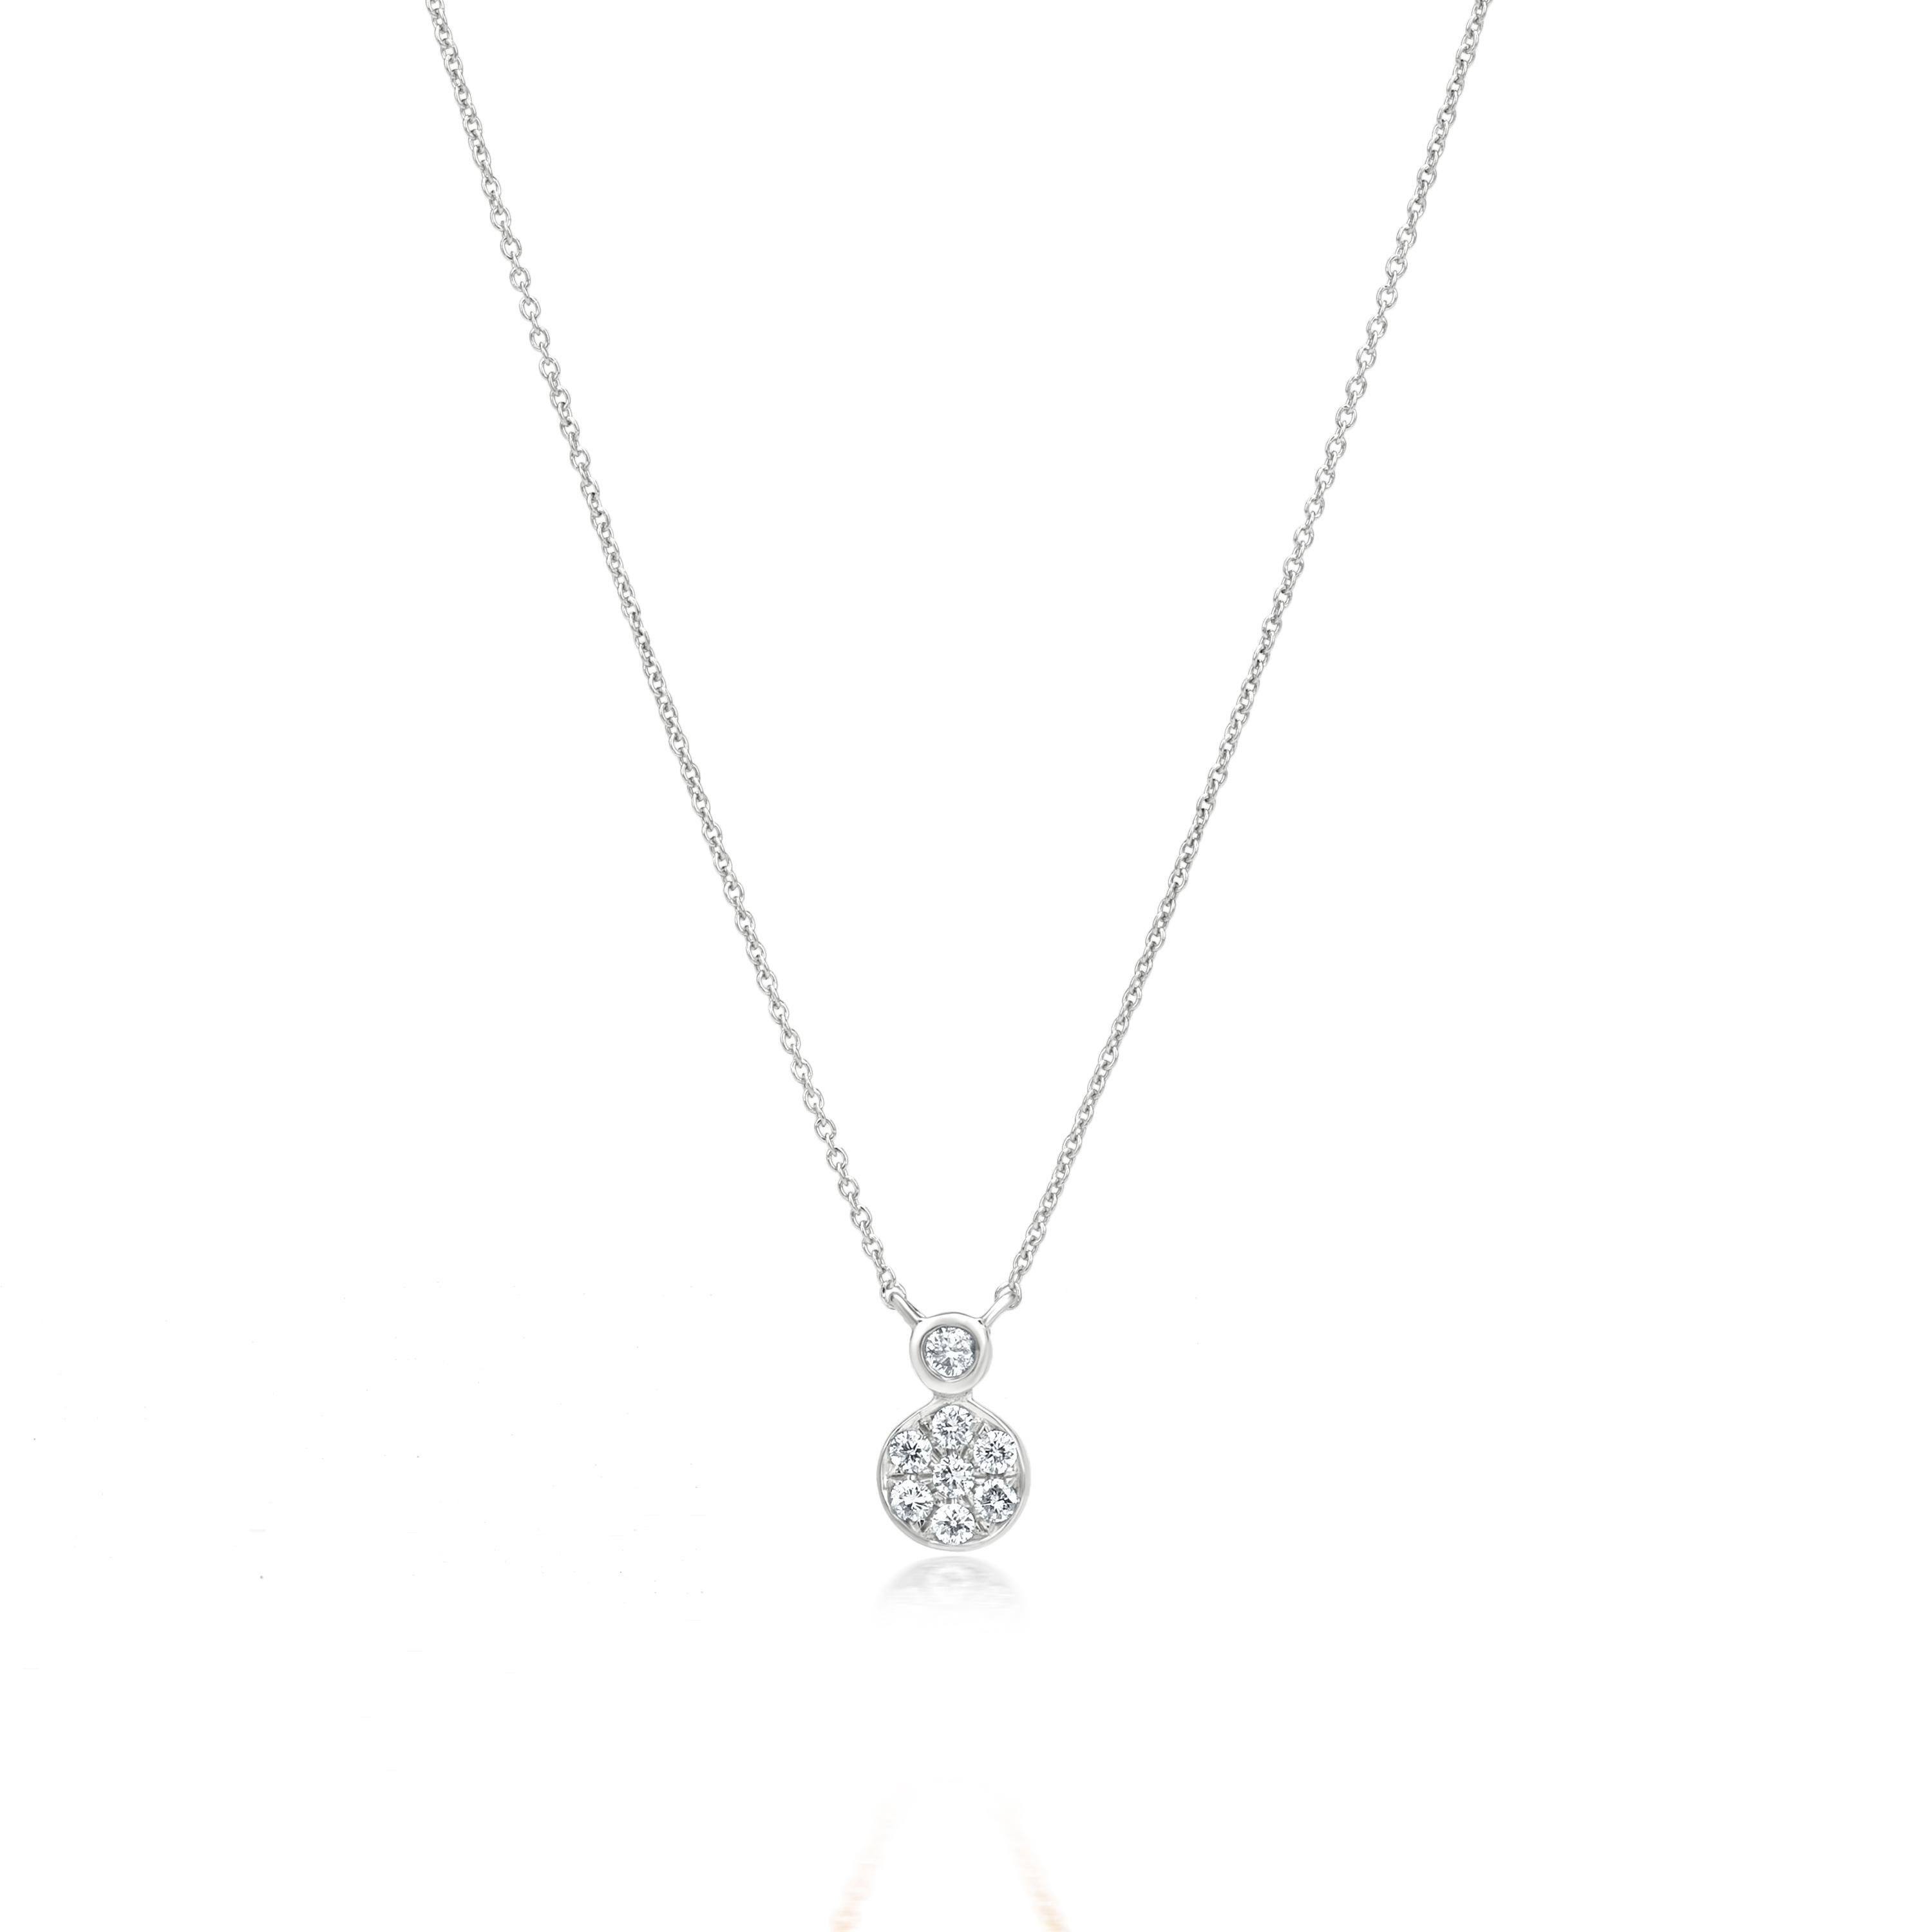 Grace your neckline with a Luxle diamond circle pendant. The circle is a universal sign that symbolizes eternity, life, wholeness and perfection. Subtle yet pretty this circle pendant necklace is the new fashion statement. This necklace features 8